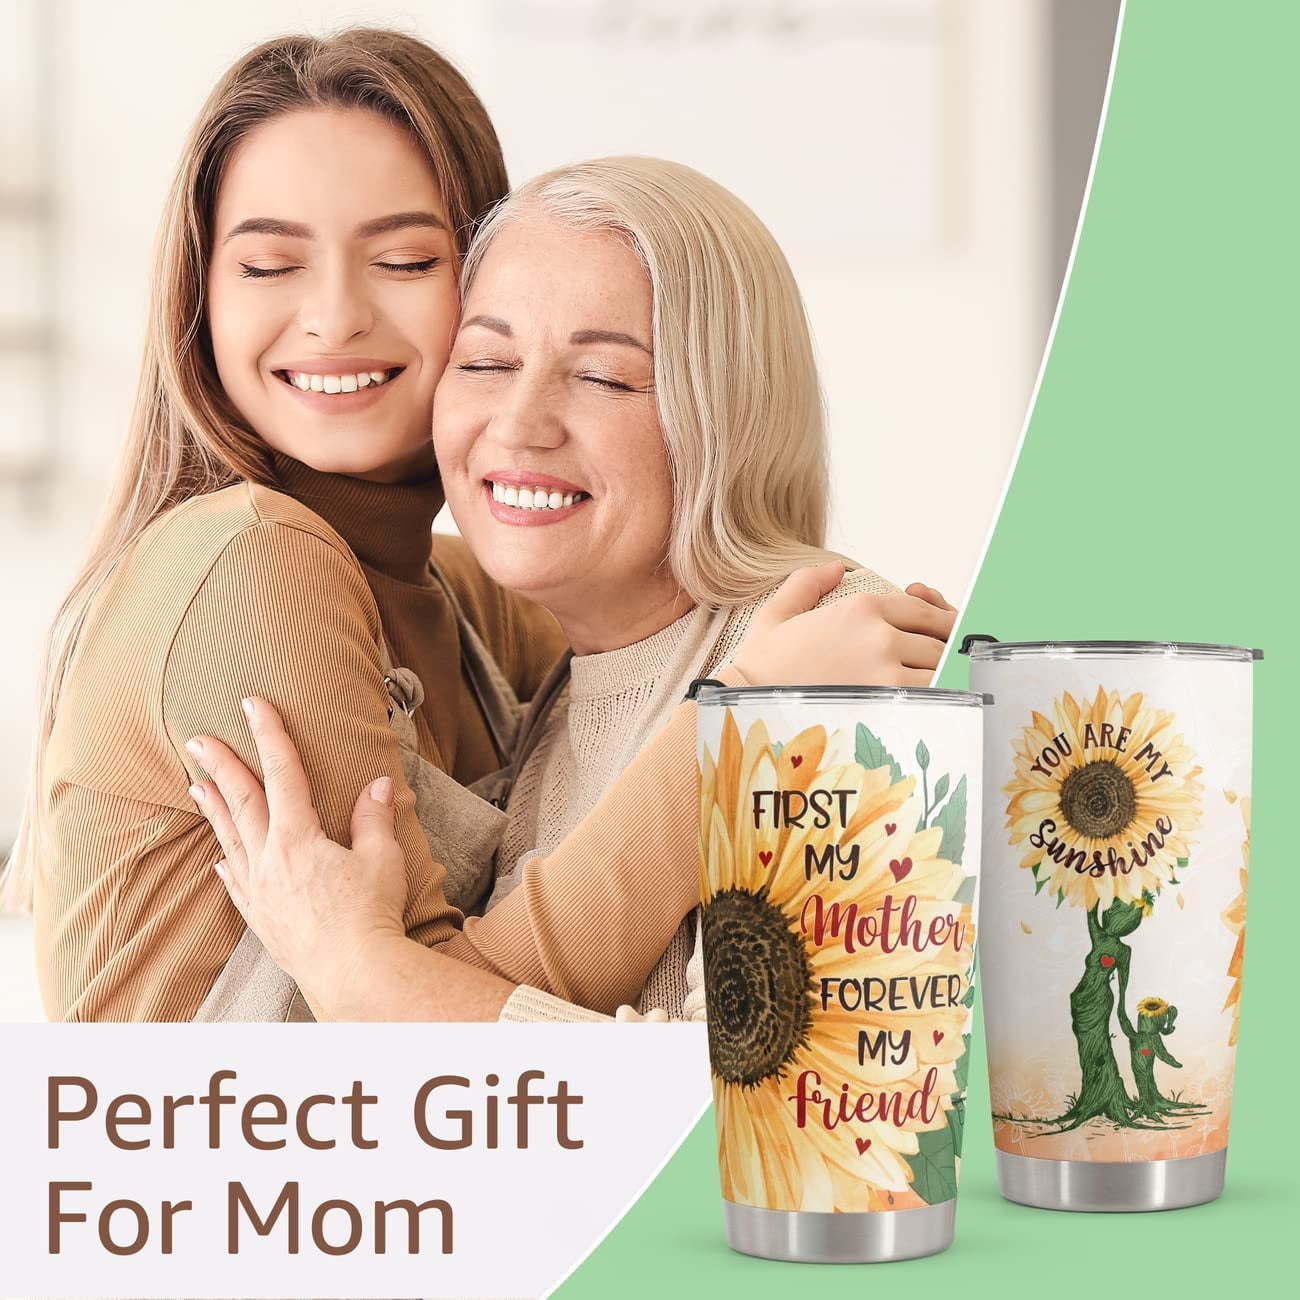 aoselan Gifts for Mom from Daughter - Mom Gifts - Birthday Gifts for Mom,  Mom Christmas Gifts from Daughter, Mom Birthday Gifts - 20oz You Are My  Sunshine Tumbler 